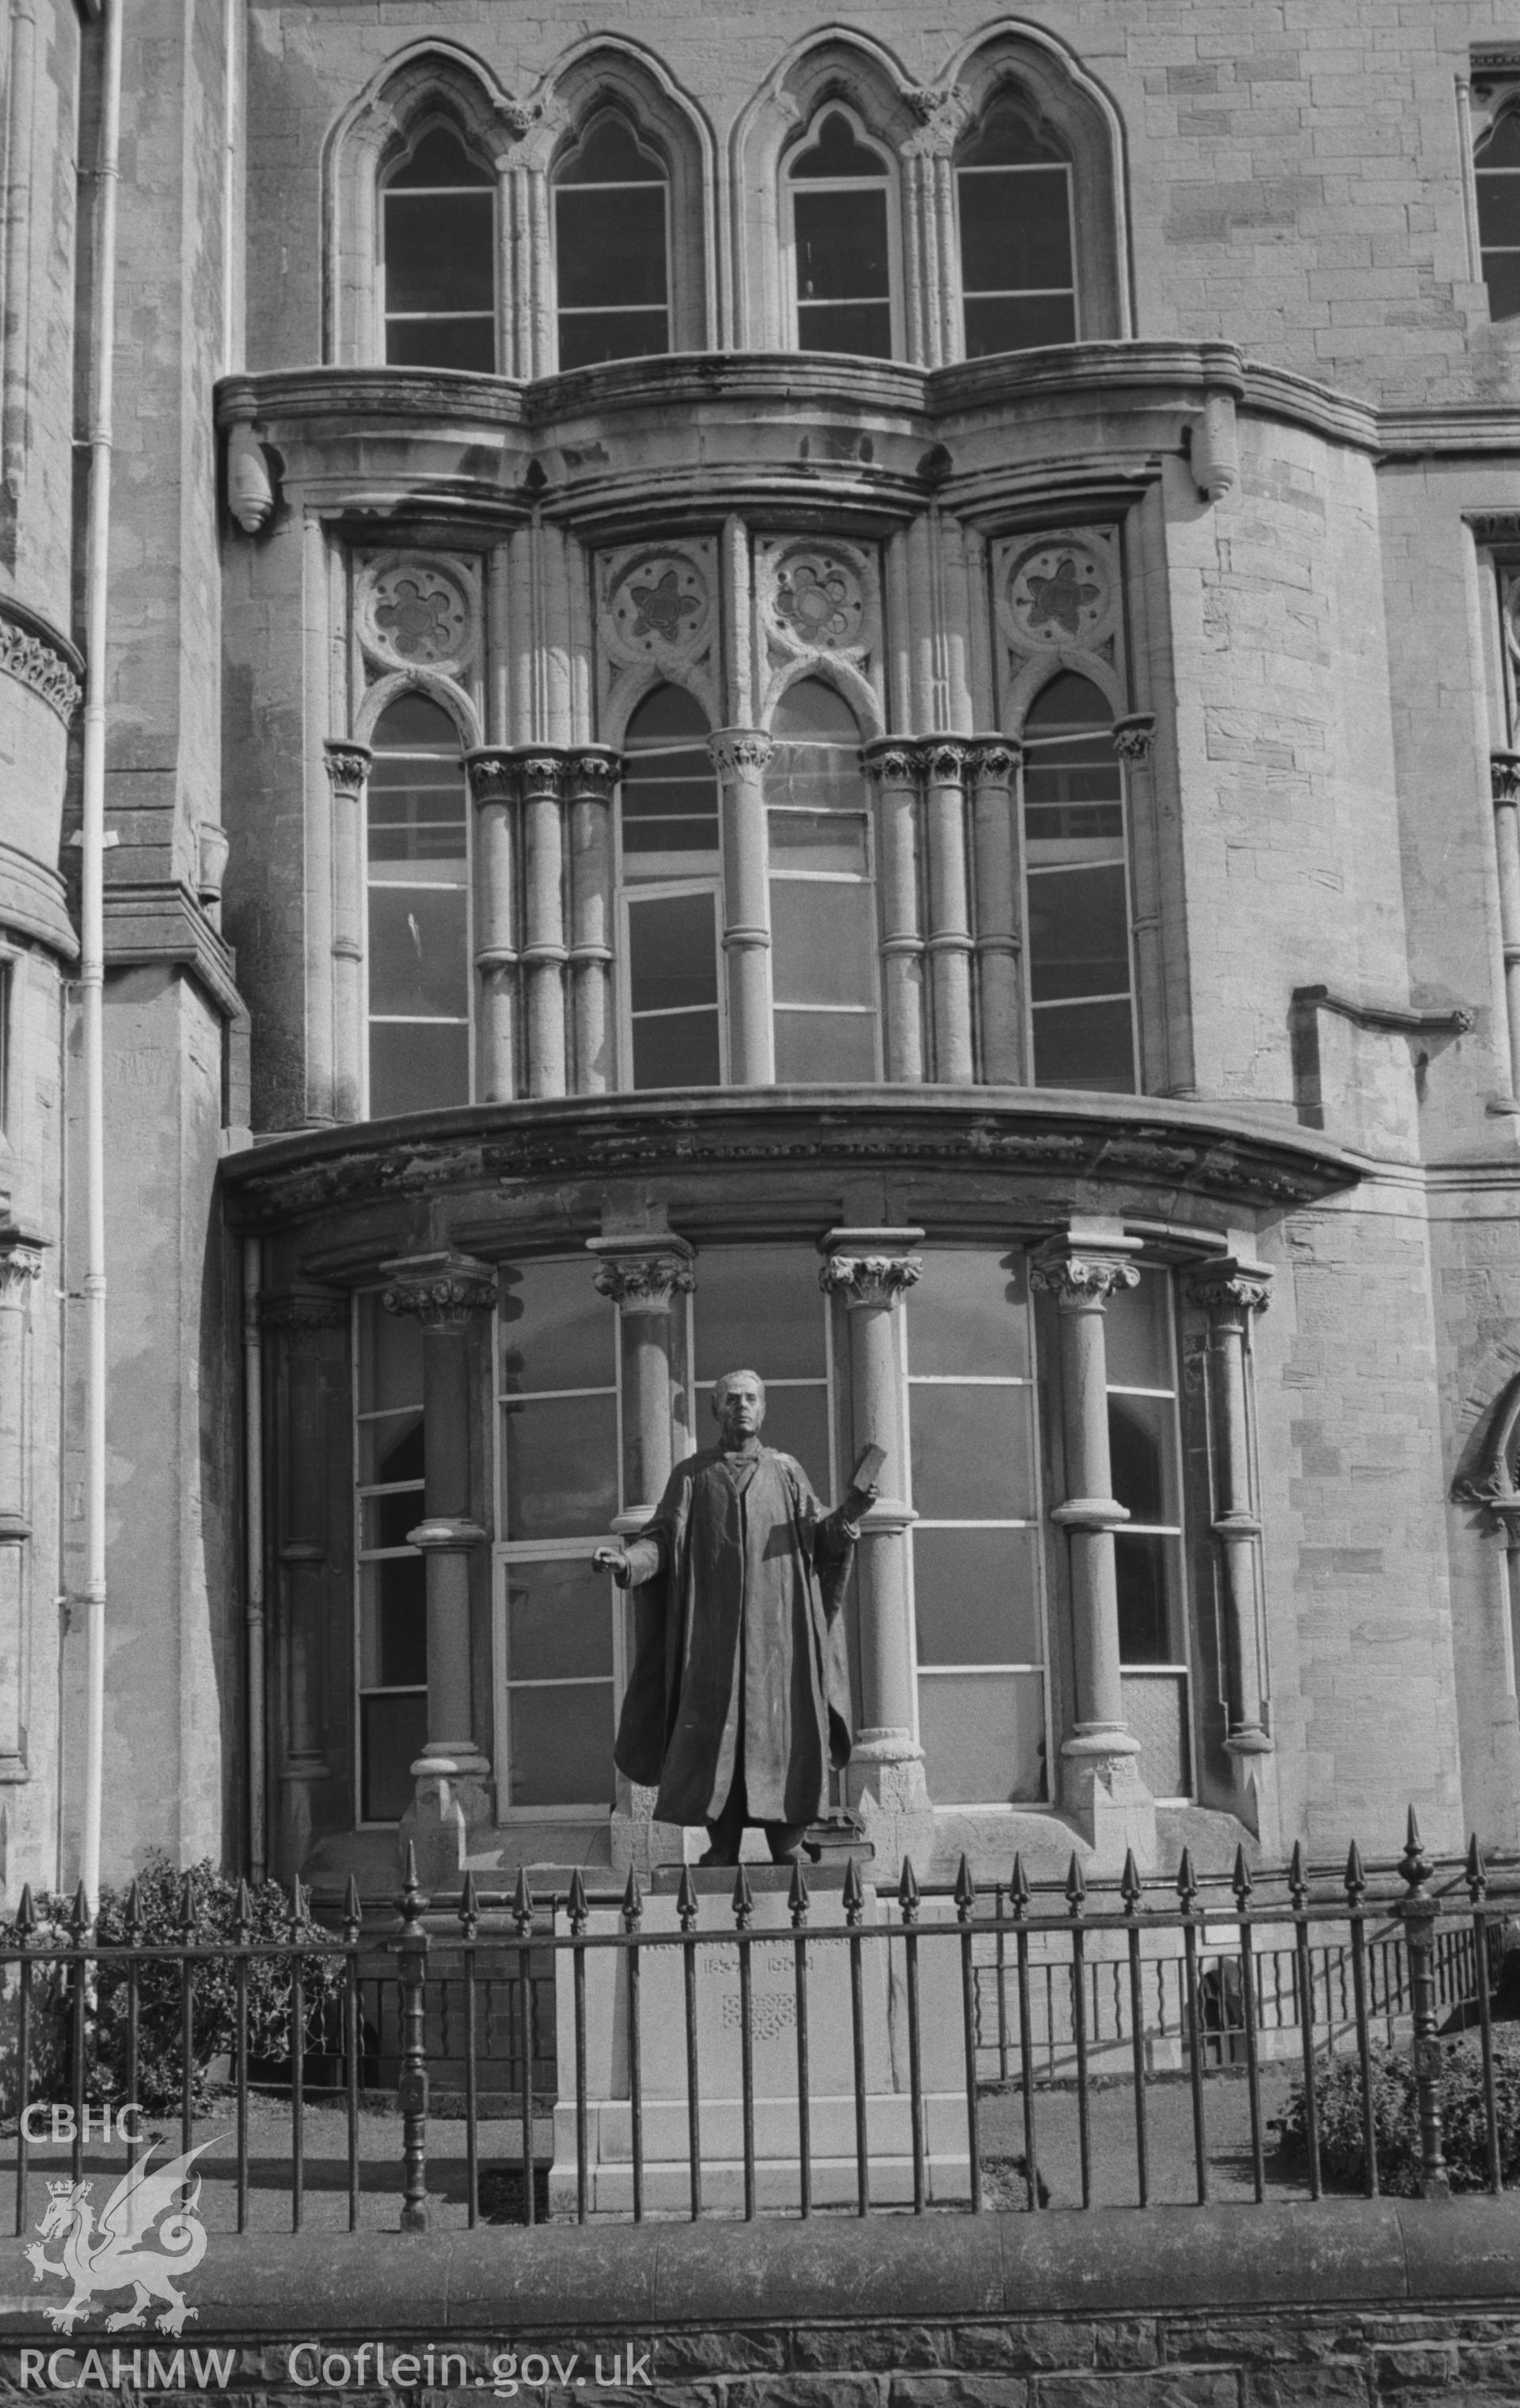 Digital copy of a black and white negative showing the statue of Thomas Charles Edwards on the north west facing side of Old College, Aberystwyth. Photographed by Arthur O. Chater on 15th August 1967 from Grid Reference SN 581 817.